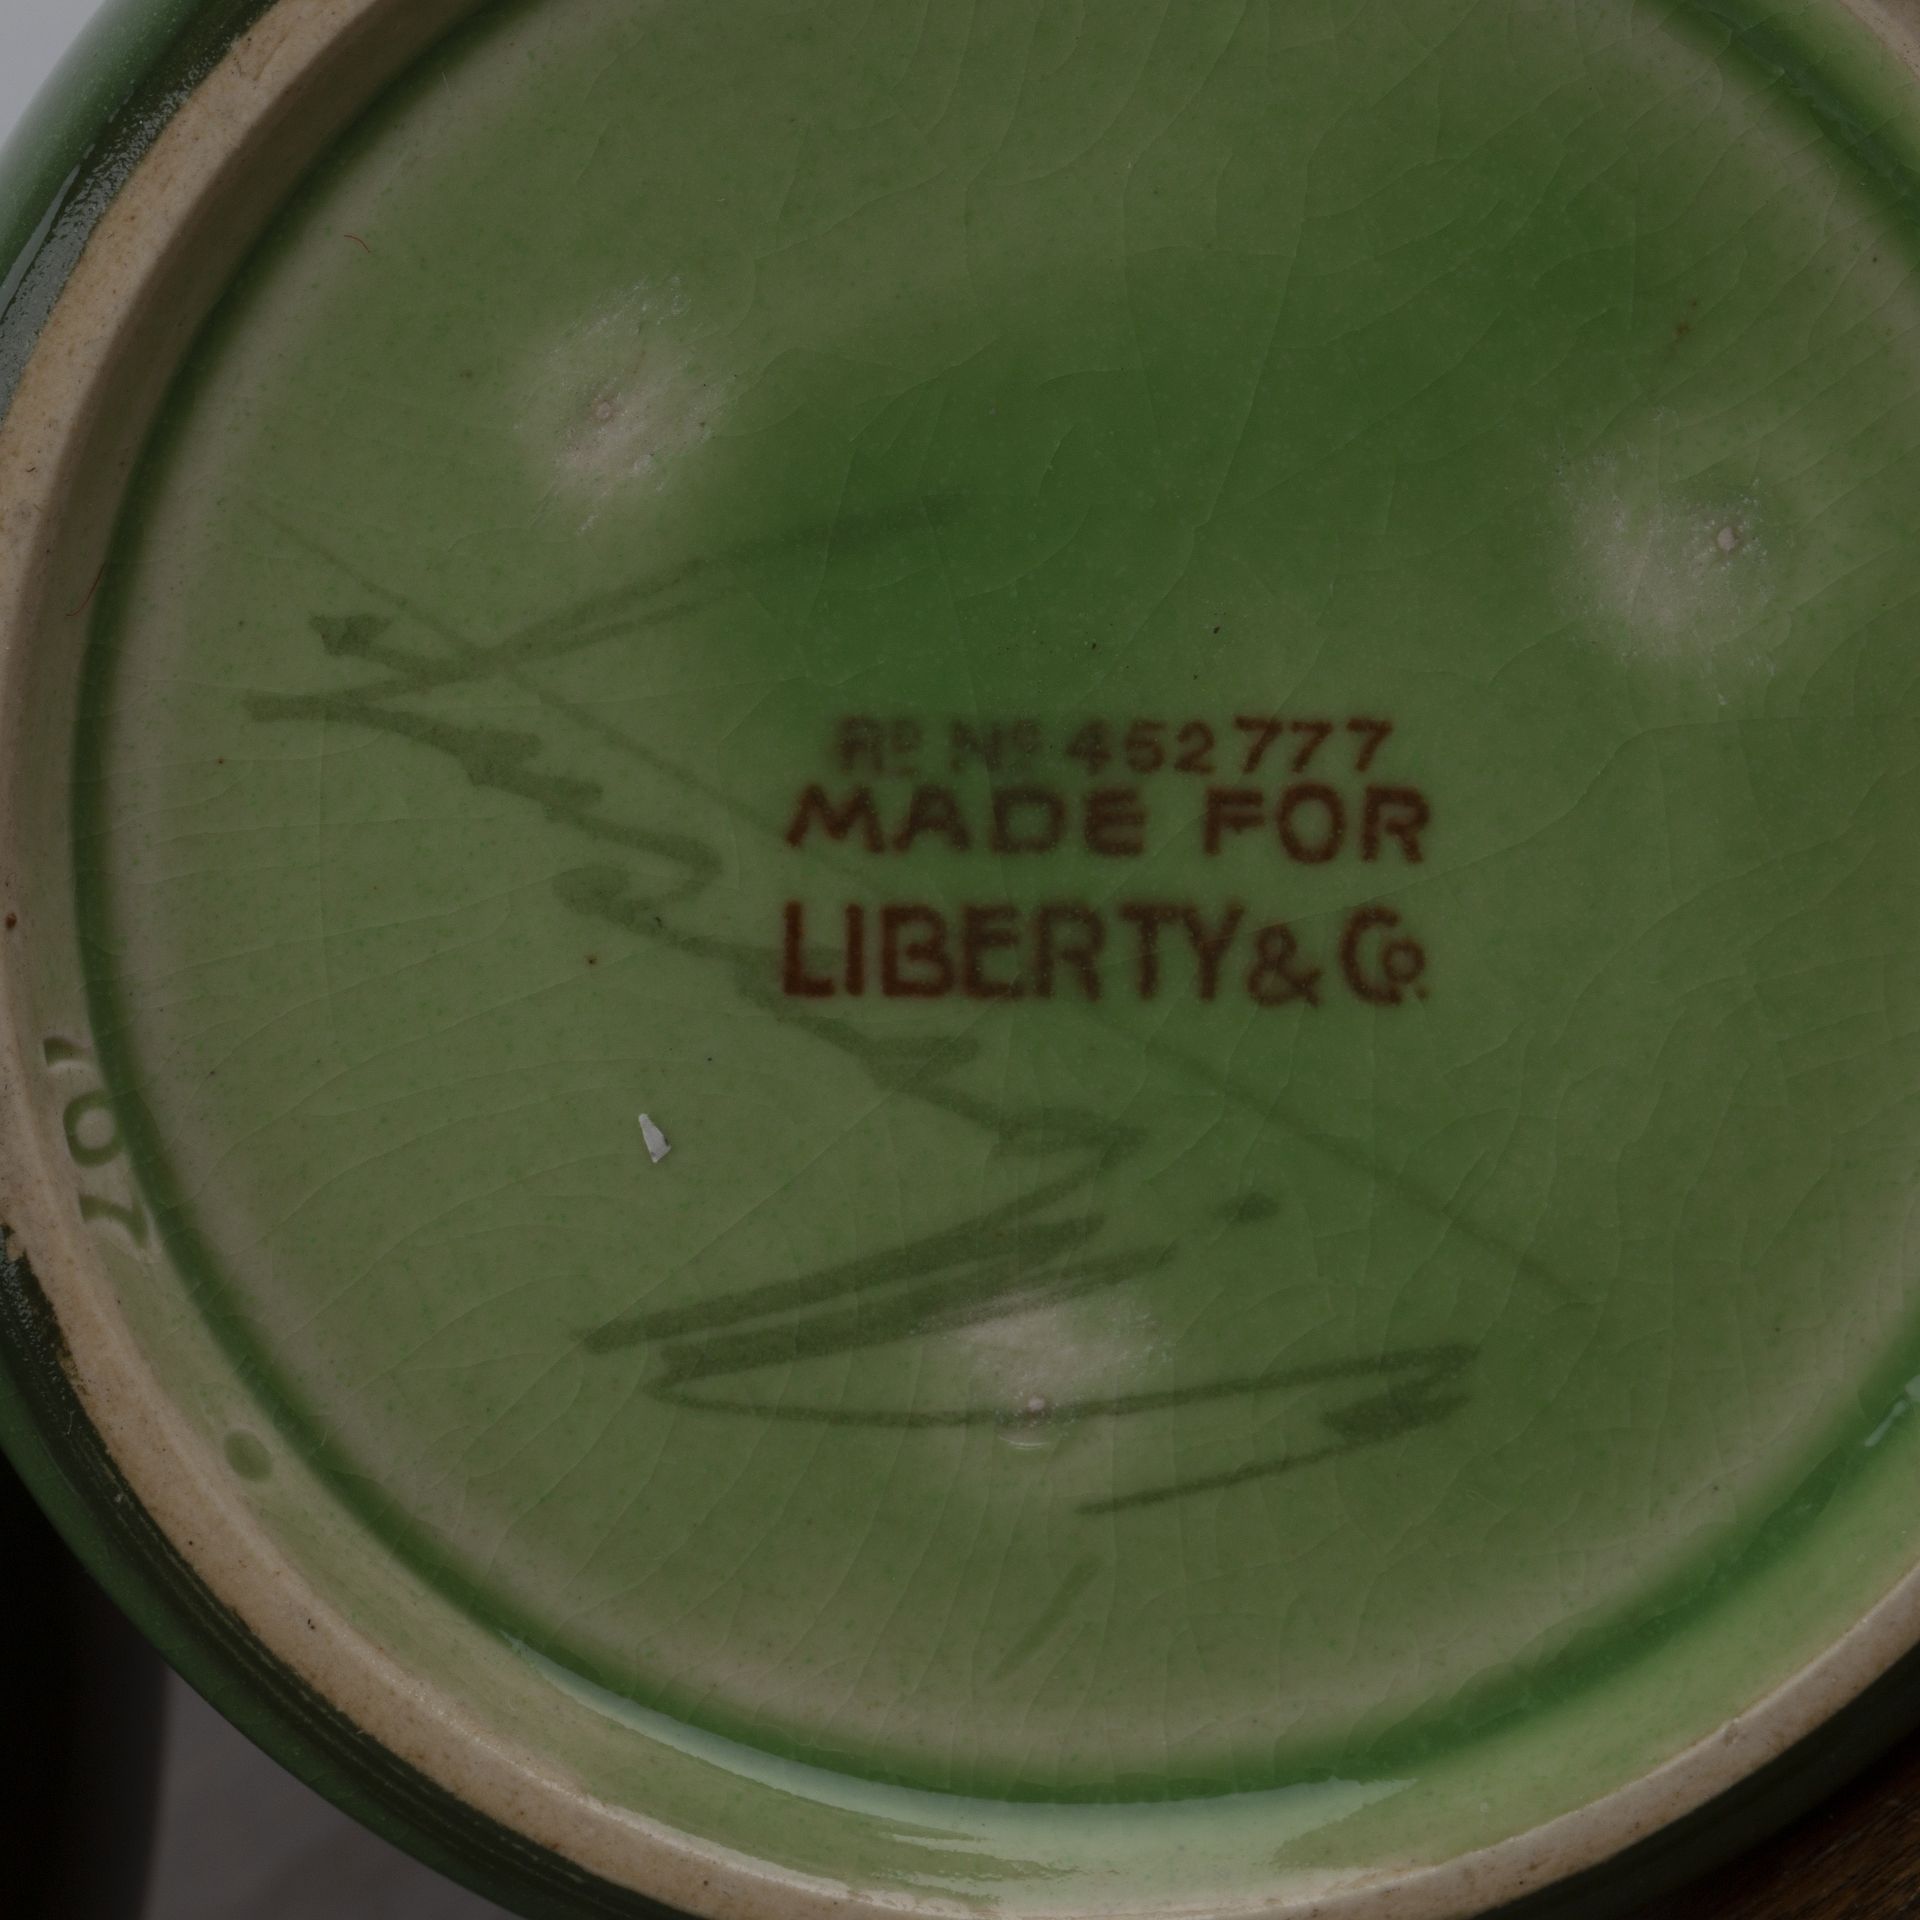 William Moorcroft (1872-1945) for Liberty and Co 'Flamminian ware' in green colourway, with - Bild 6 aus 6